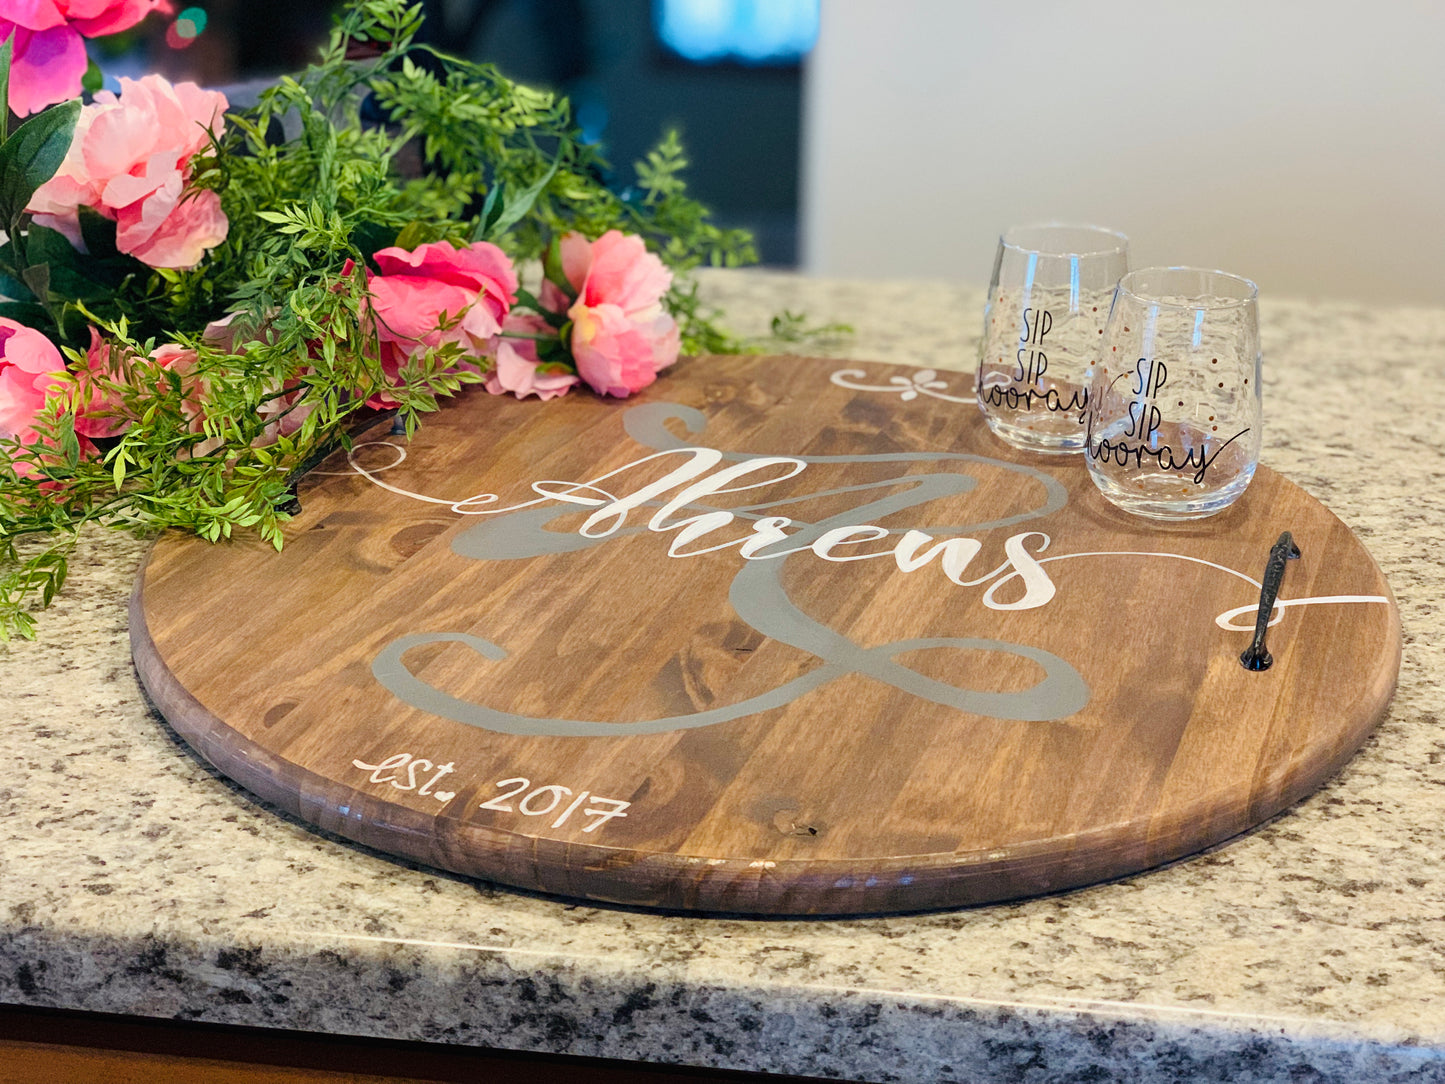 Custom wood signs & tray. Hand painted by Stacy. They are not vinyl. They are one of a kind pieces with blended and stains and hand done! - Stacy's Pink Martini Boutique